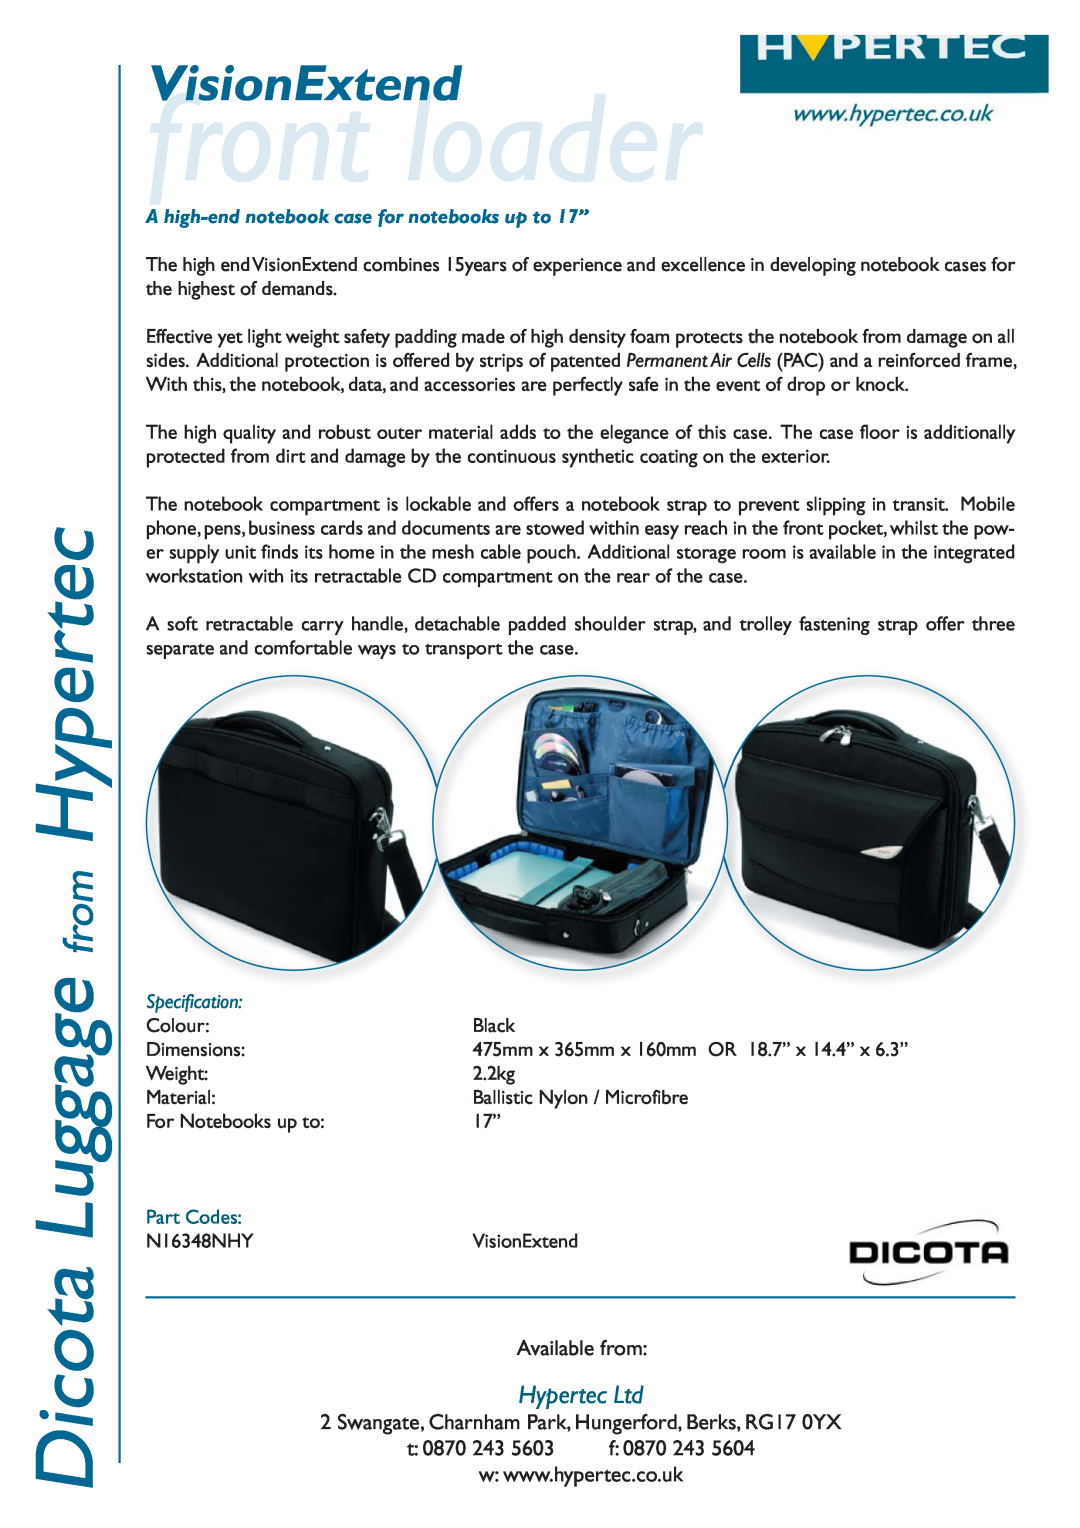 Hypertec N16348NHY dimensions front loader, Dicota Luggage from Hypertec, VisionExtend, Available from, t 0870 243 